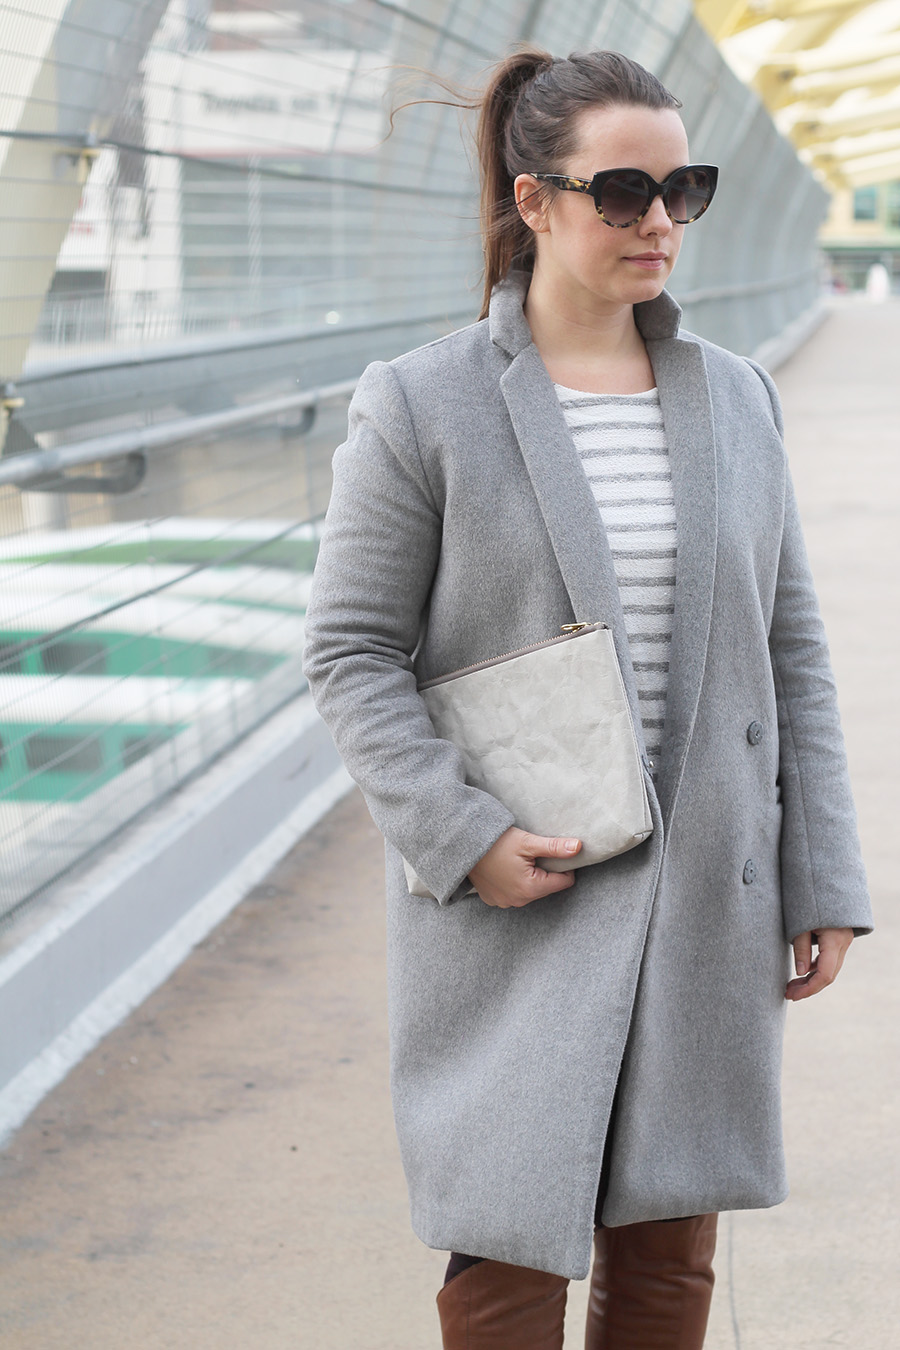 Fashion, Life and Style, Toronto Bloggers, Grey Wool Coat, Paper Cluich, Fashion Inspiration